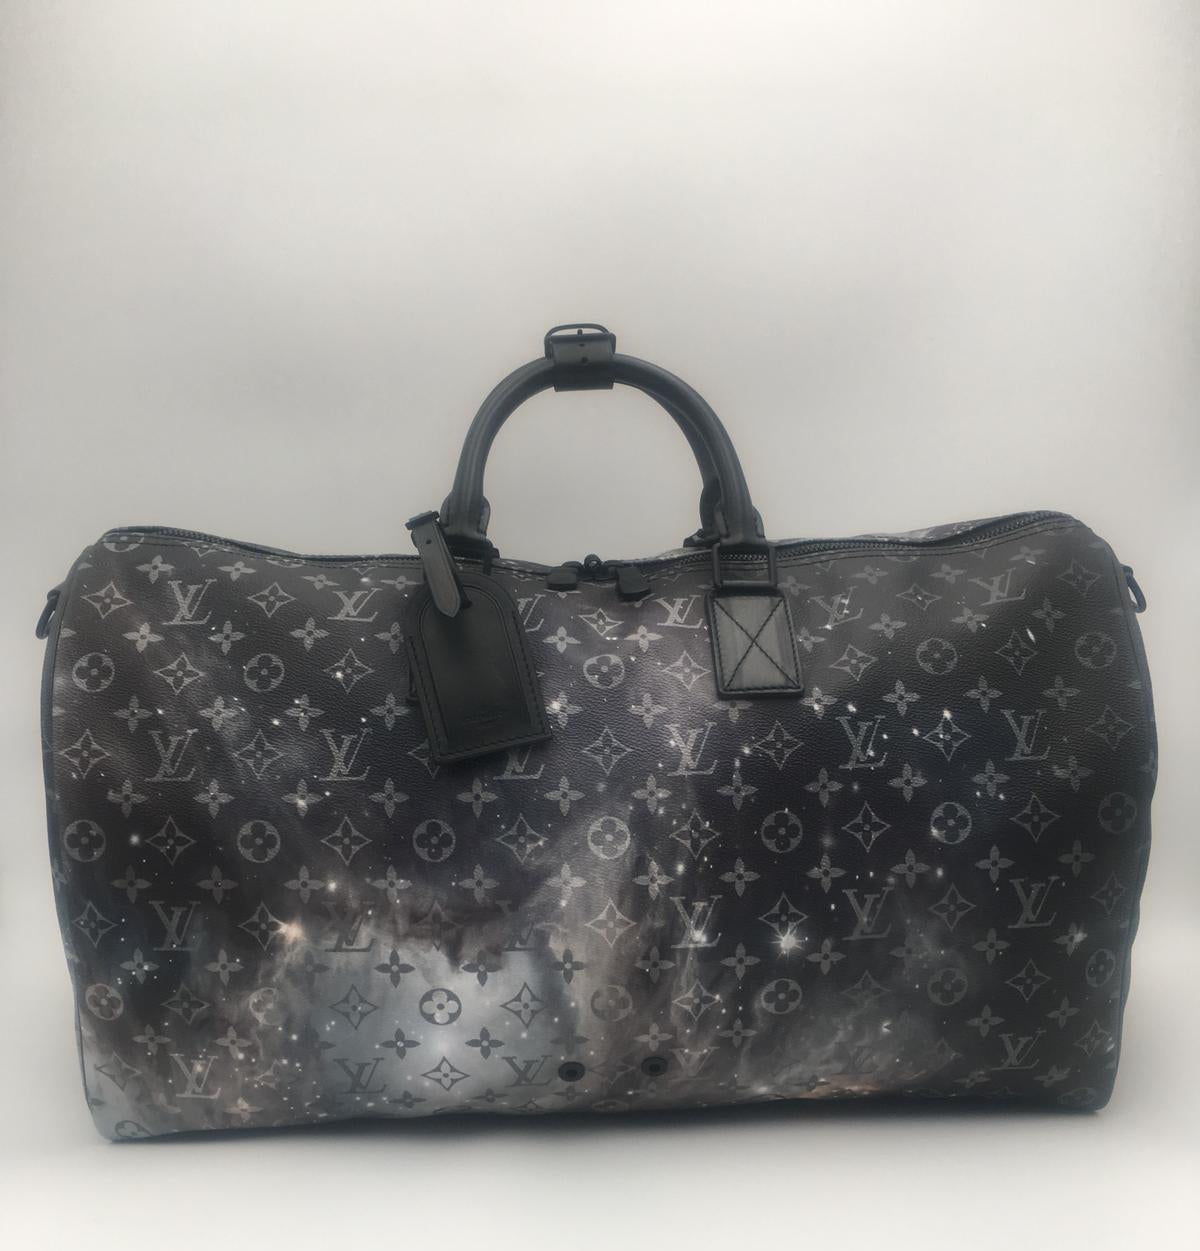 Louis Vuitton Bags - Buy your next Louis Vuitton Bag at Collector's Cage –  Collectors cage